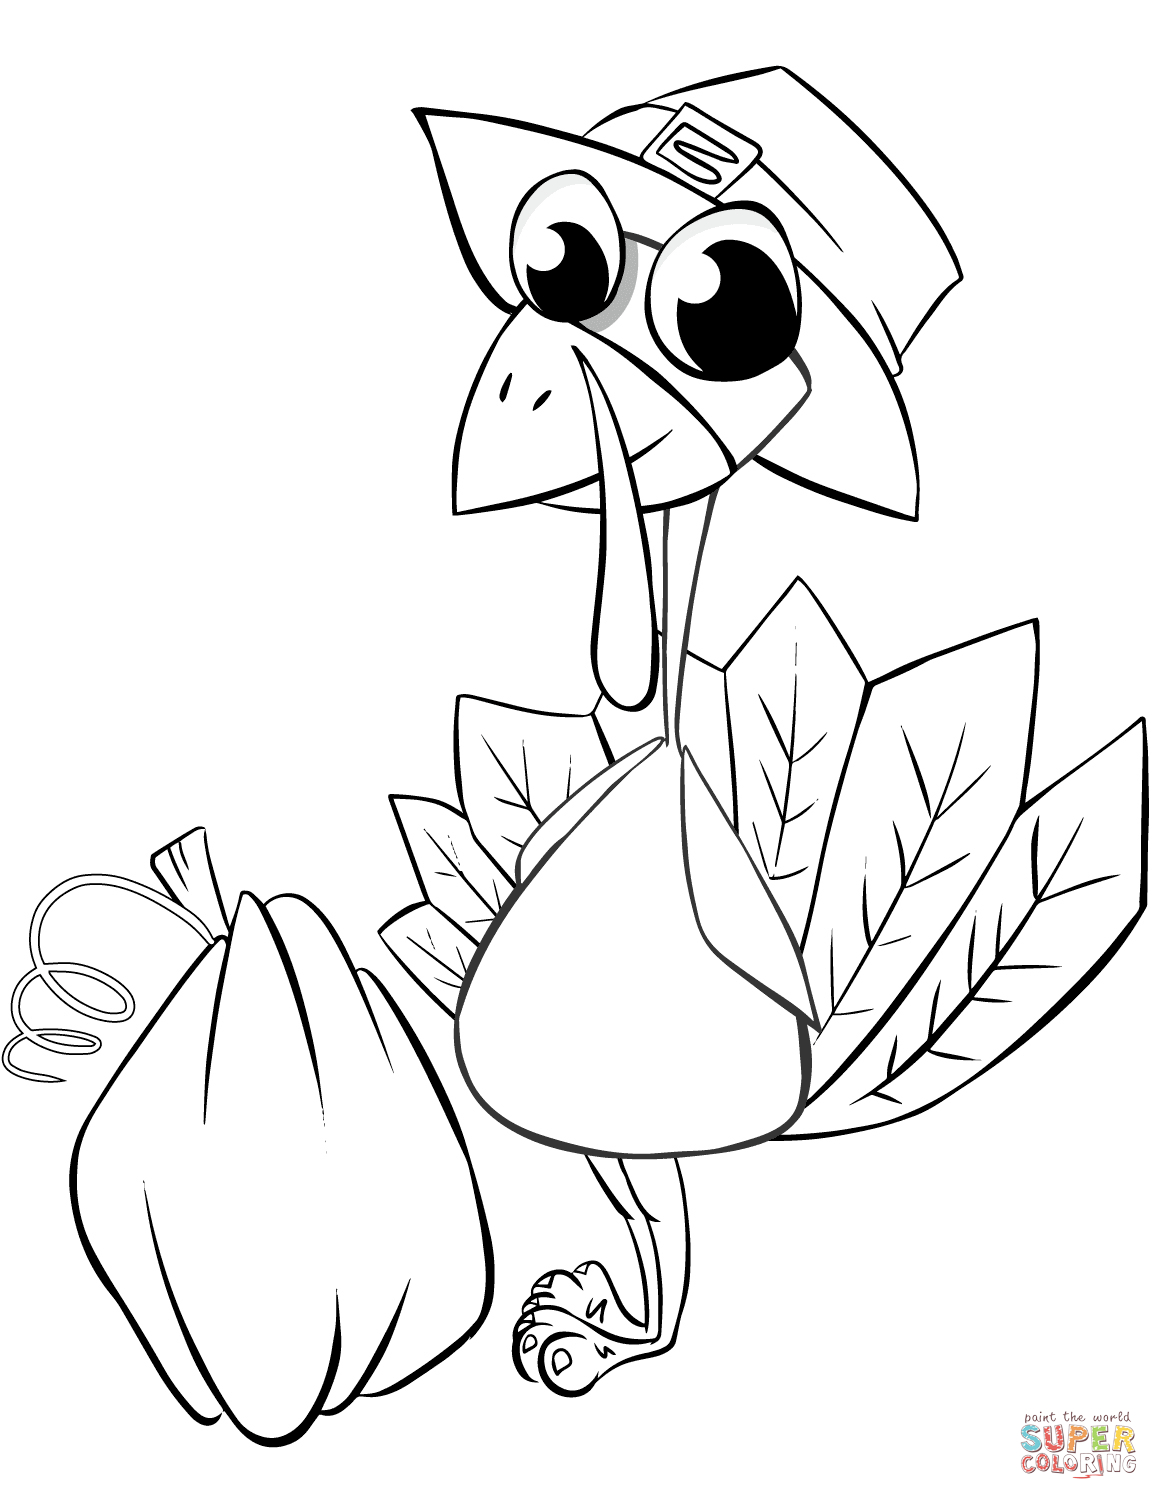 turkey-coloring-pages-free-coloring-pages-free-printable-pictures-of-turkeys-to-color-free